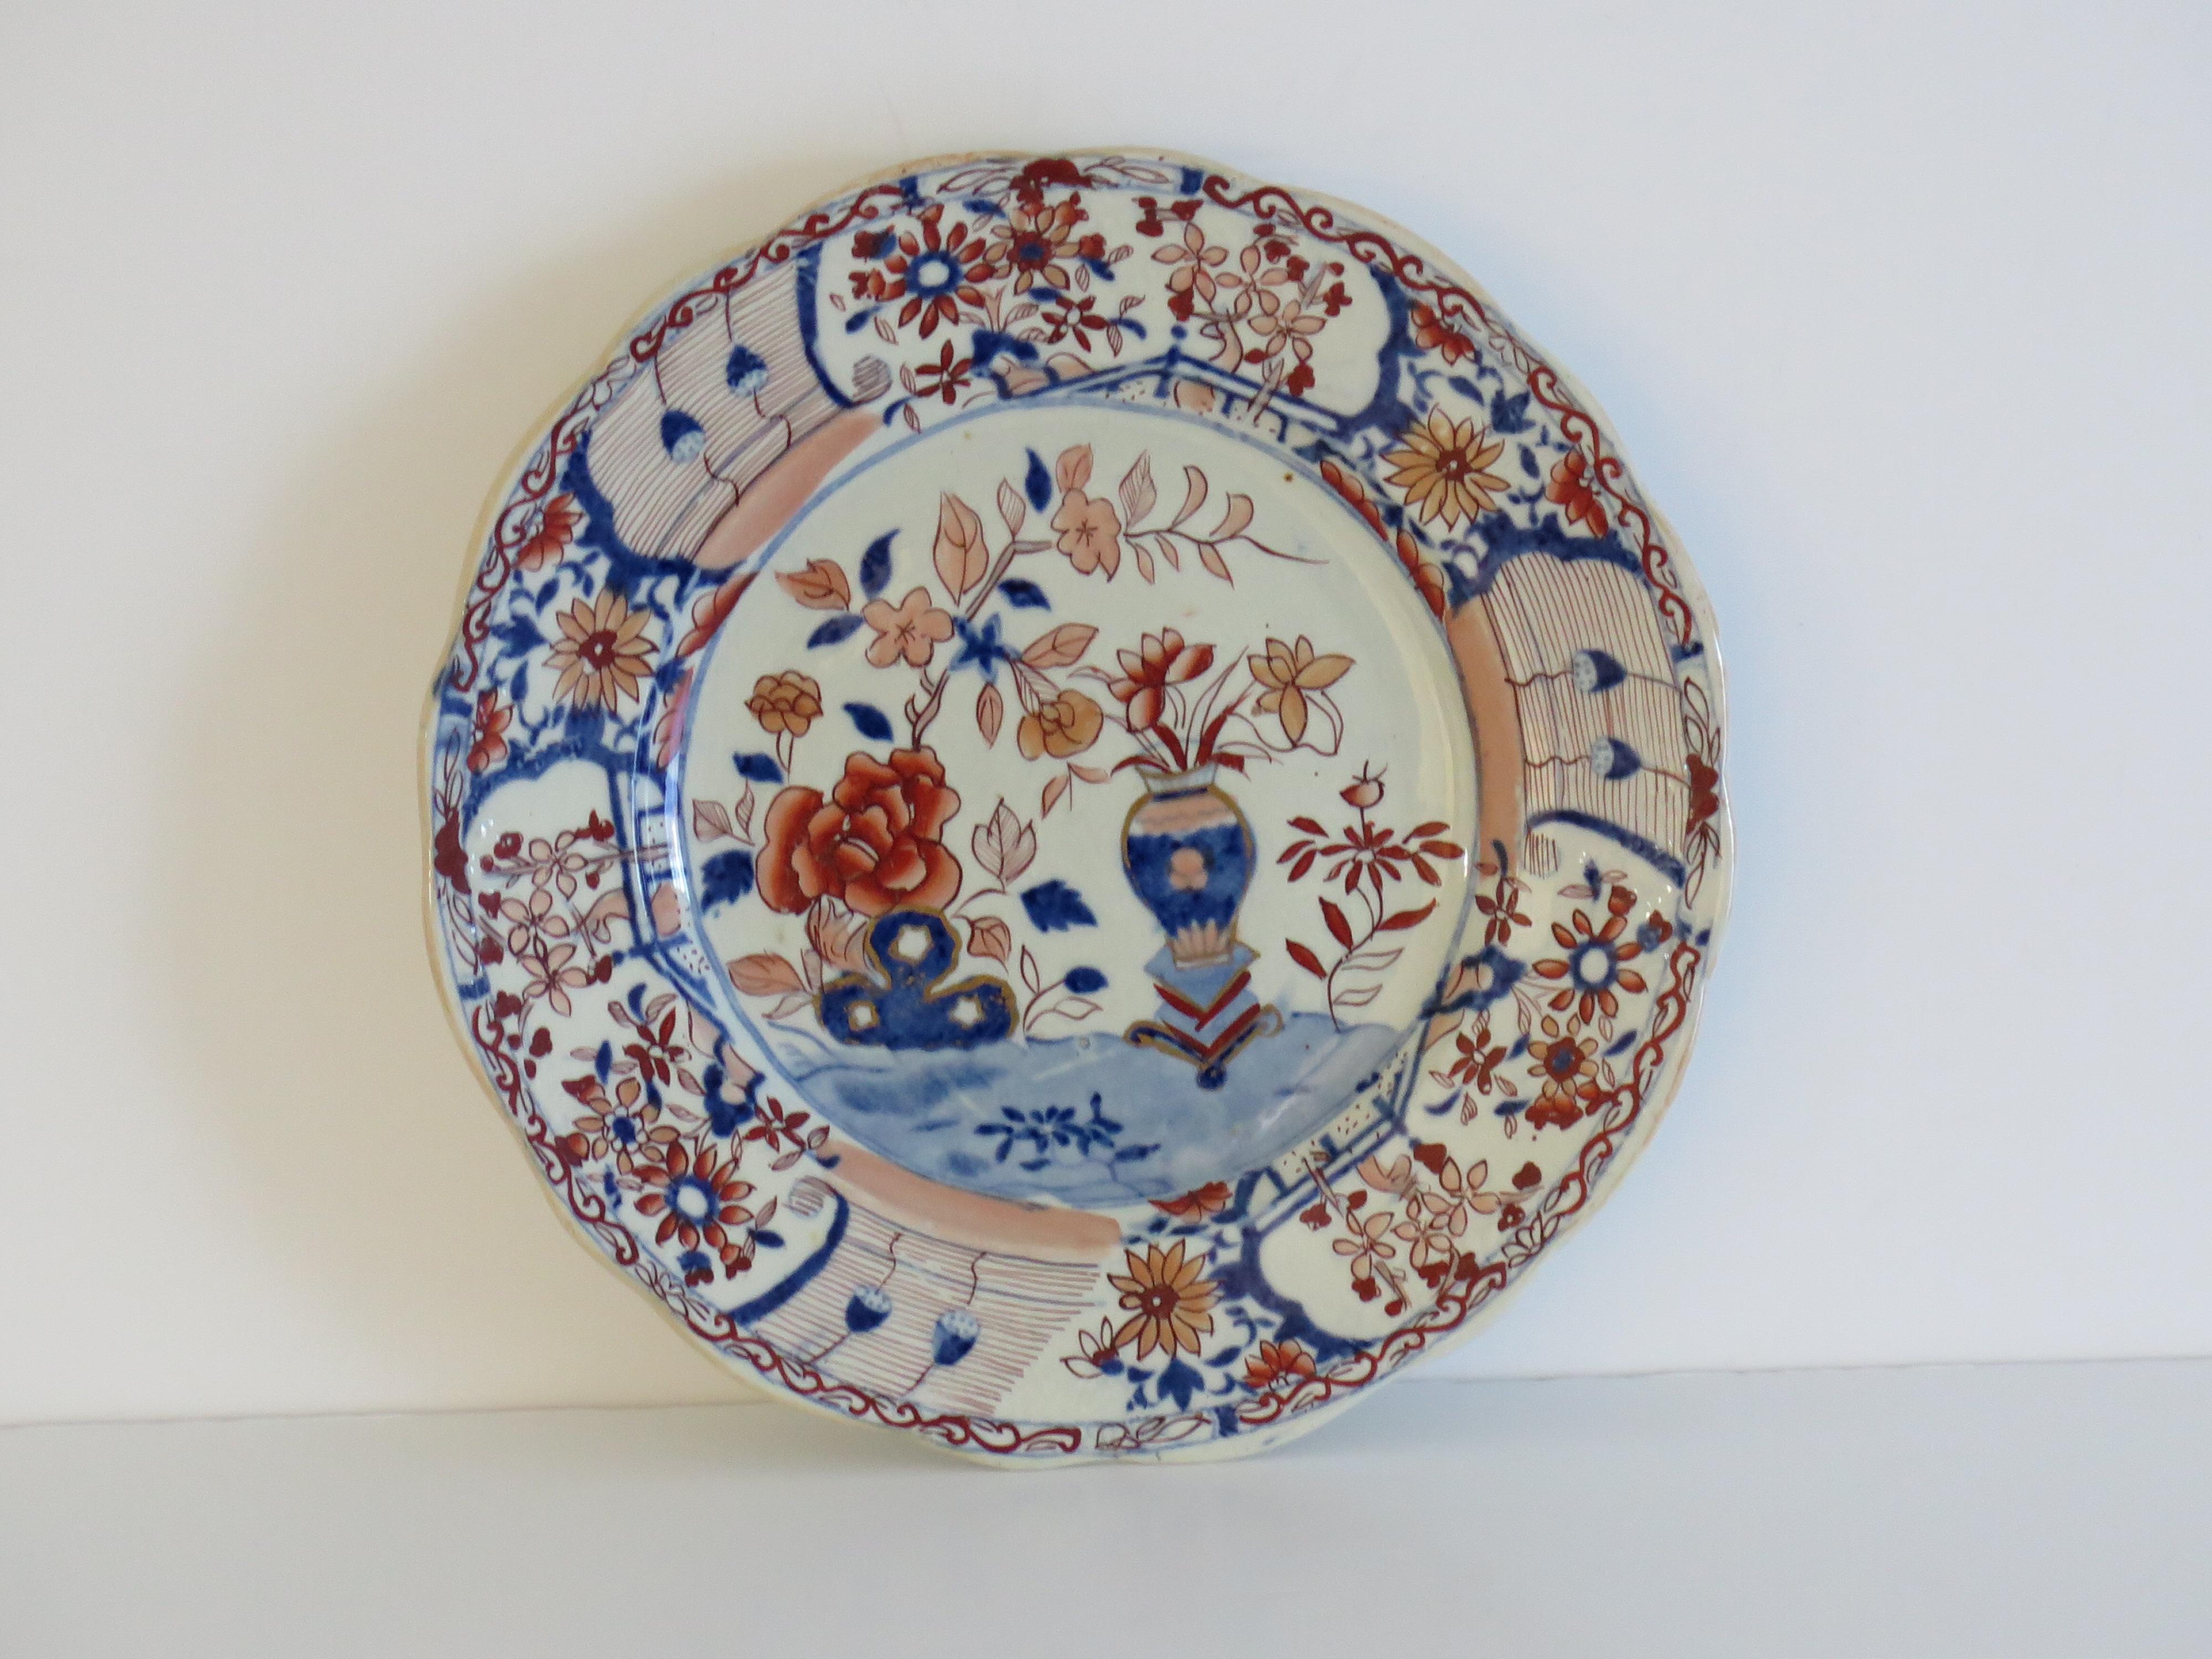 This is a very decorative ironstone pottery Plate produced by the Mason's factory at Lane Delph, Staffordshire, England, circa 1818.

The plate is circular with a wavy indented edge & moulded floral detail to the inner rim edge .

This Plate is